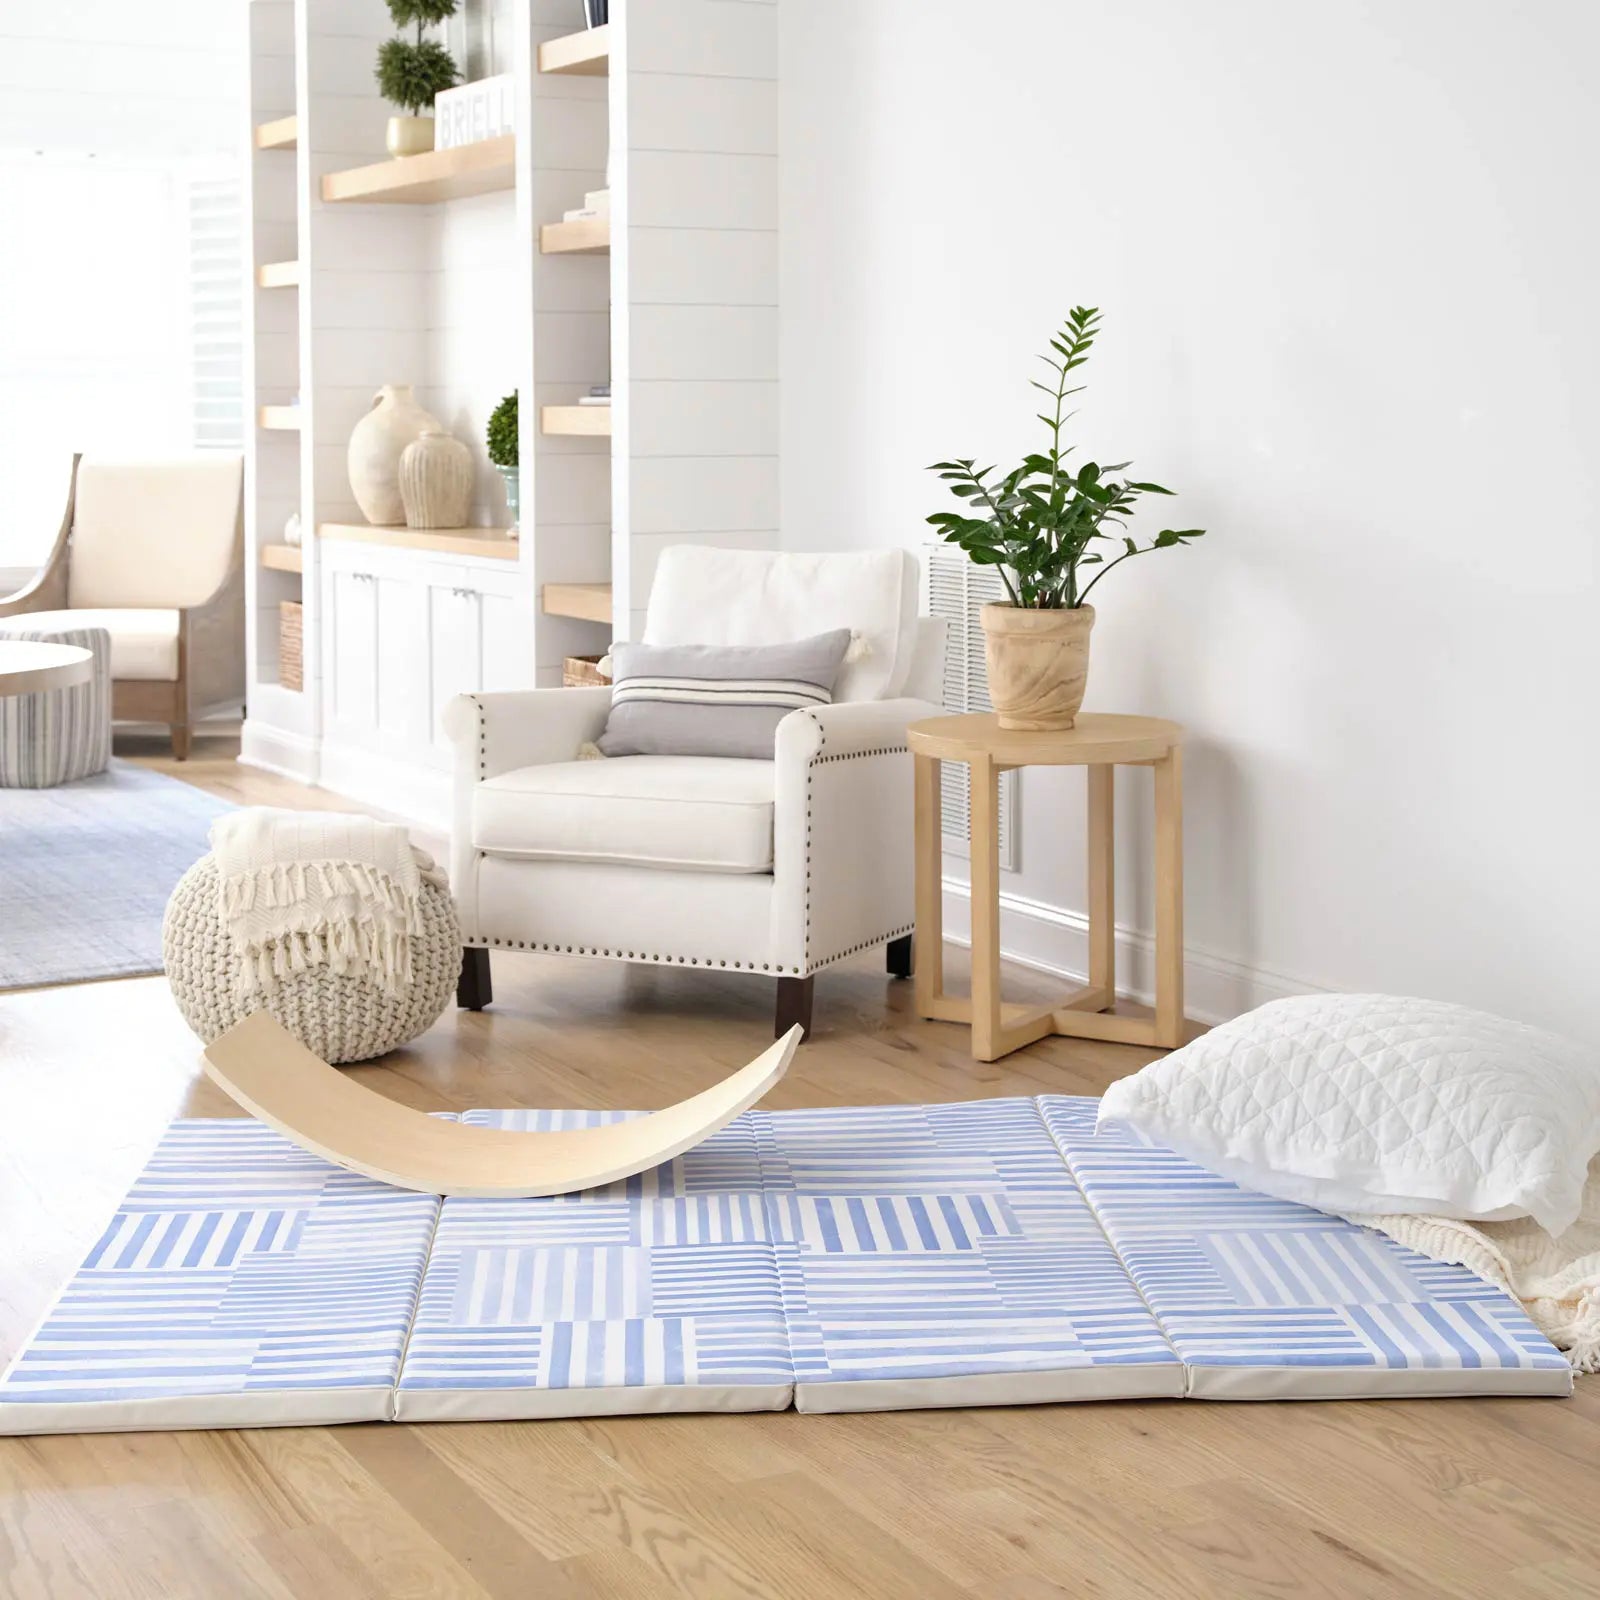 French blue and white inverted stripe tumbling mat shown in a lviing room with balance board and pillow on the mat